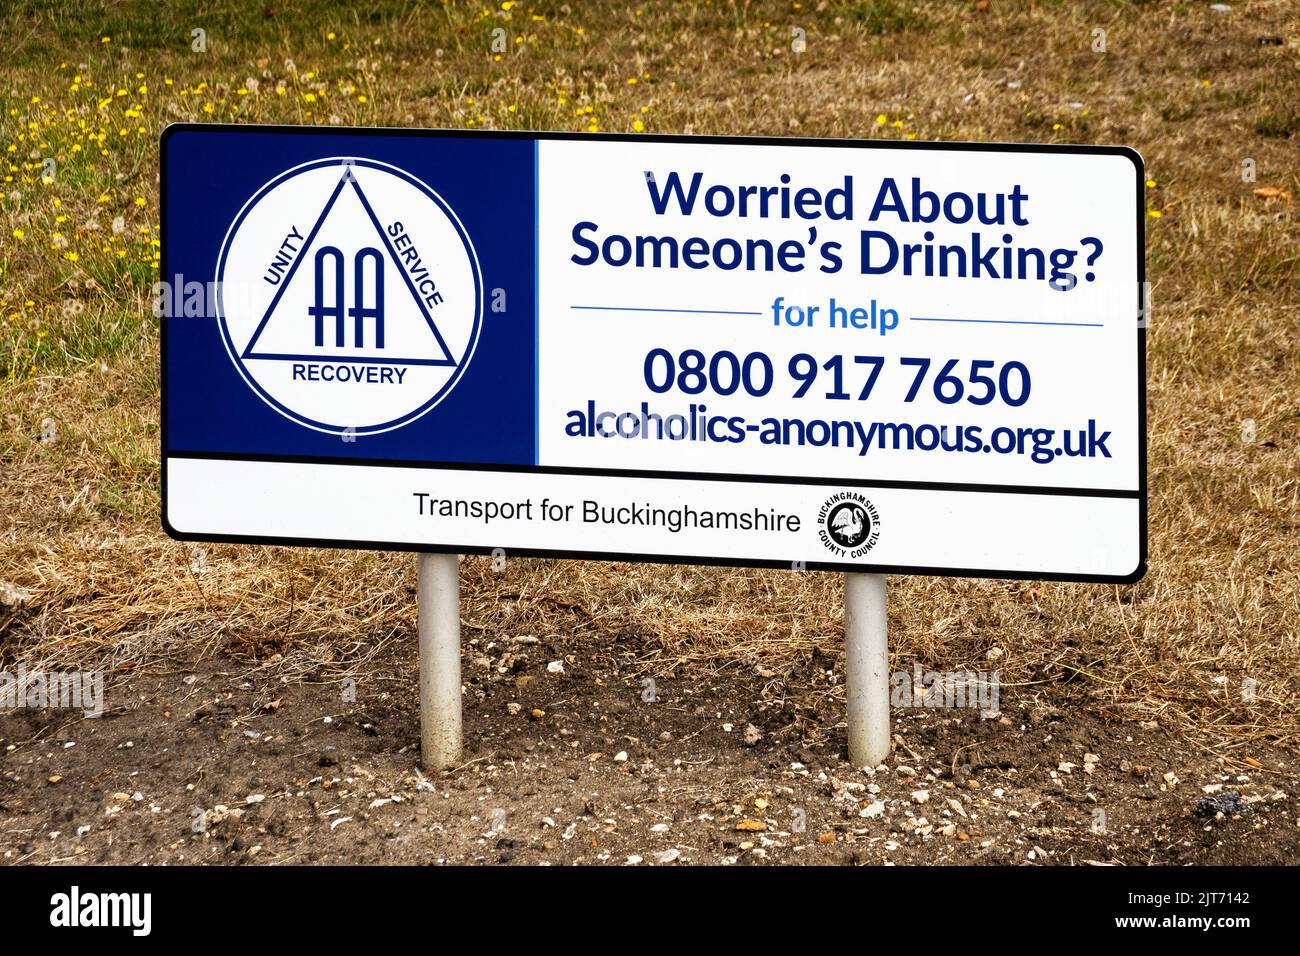 Roadside alcoholics-anonymous sign asking if worried about someone's drinking make contact with the AA. Stock Photo